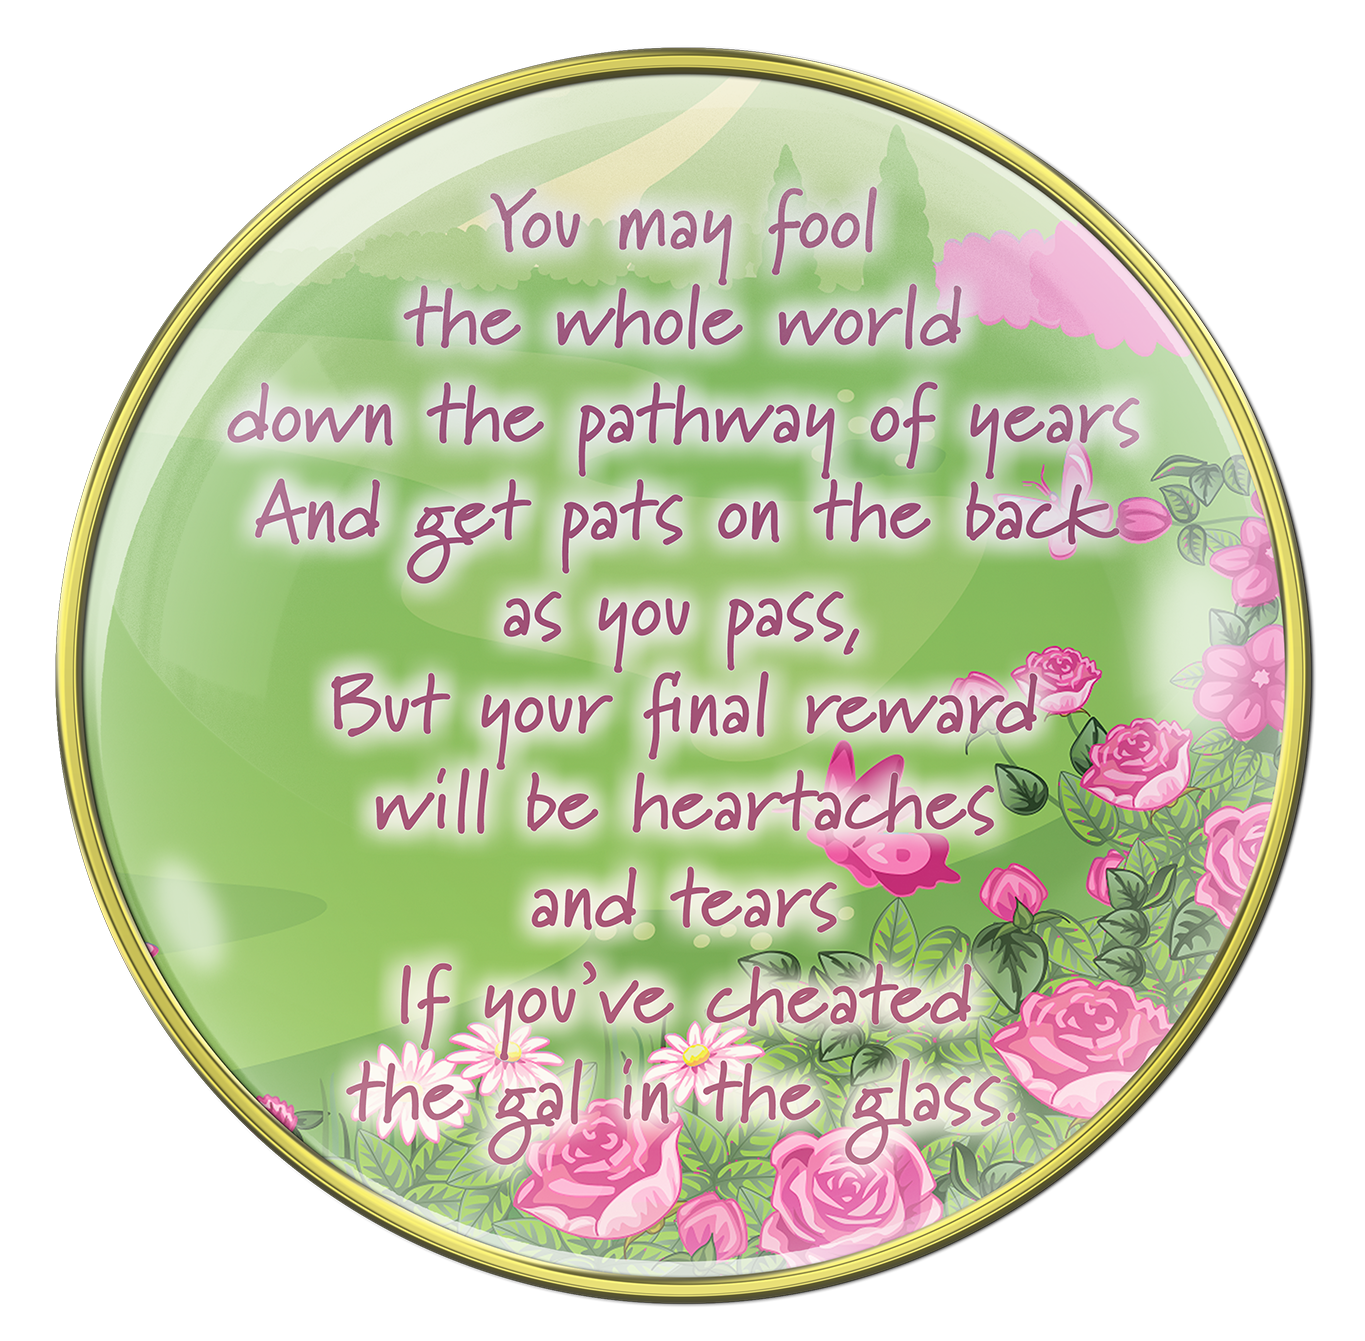 Back of Sober princess medallion, you may fool the whole world down the pathway of years and get pats on the back as you pass, but your final reward will be heartaches and tears if you've cheated the gal in the glass, written in pink and fills the green back and has pink roses and flowers, and one butterfly.